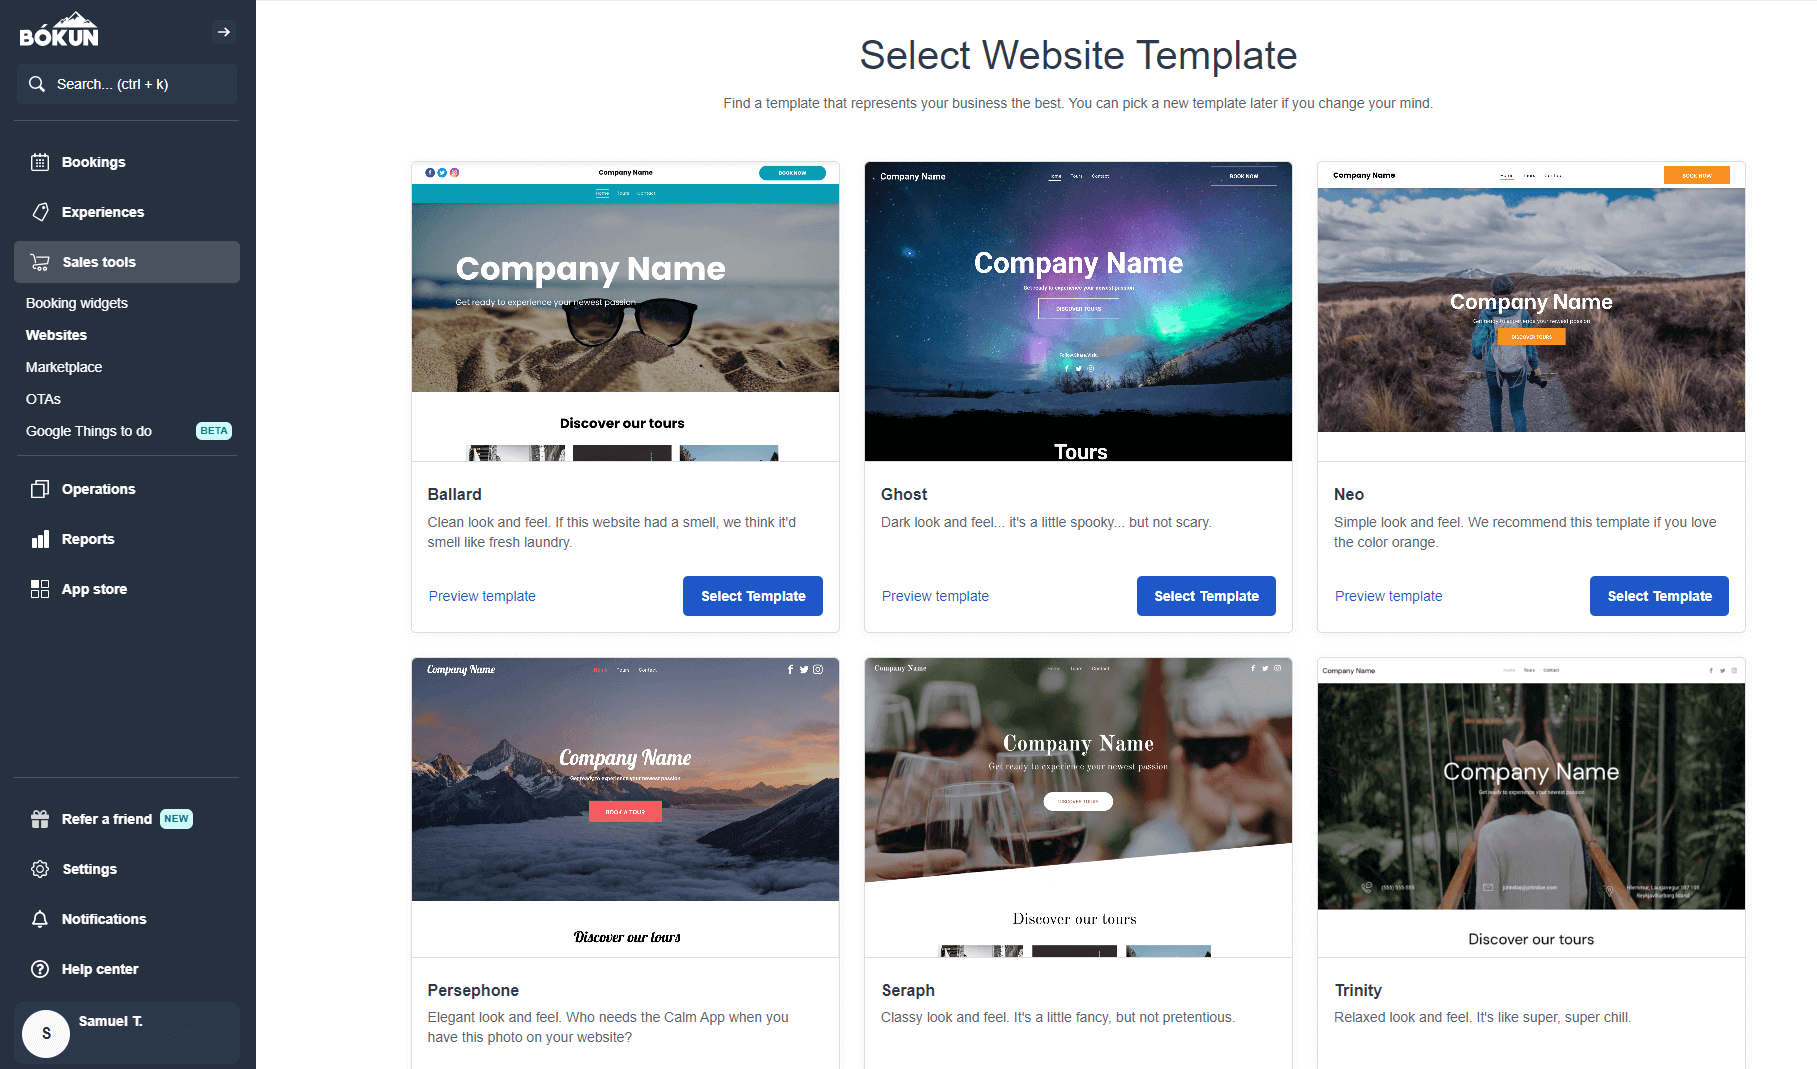 Select Website Template: Find a template that represents your business